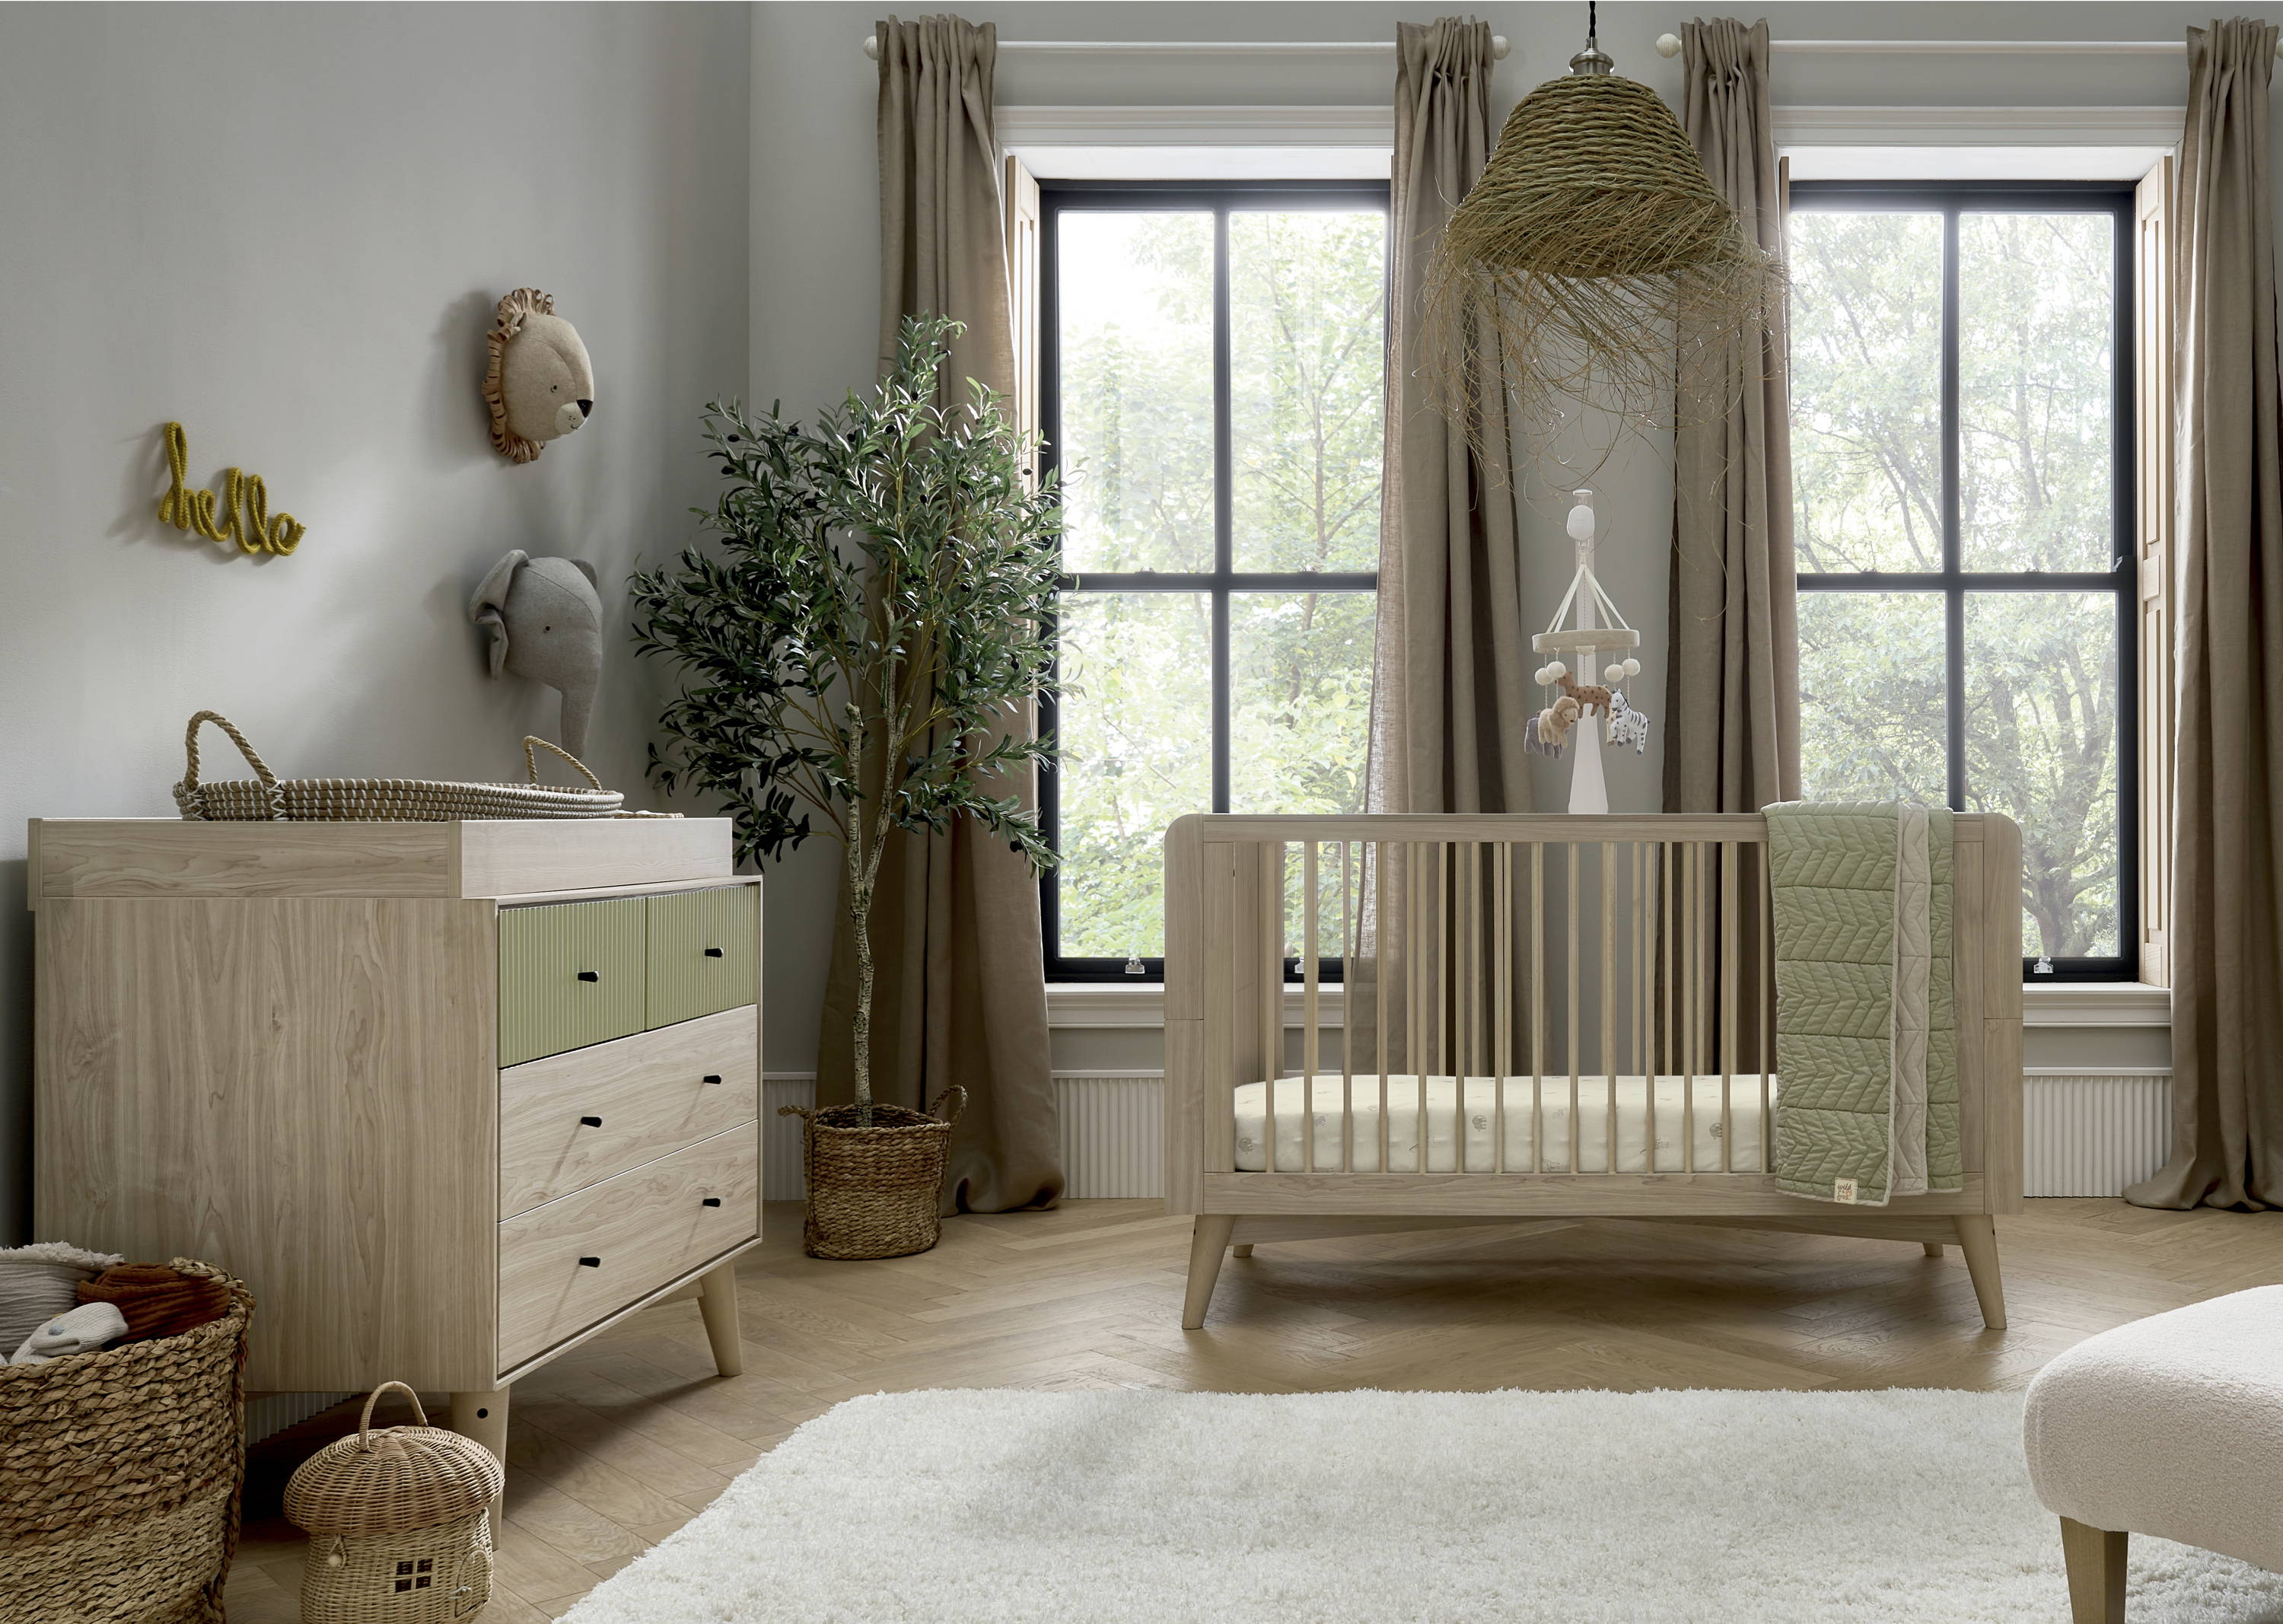 The Mamas and Papas Coxley cotbed and dresser changer stand in a modern nursery with large windows.